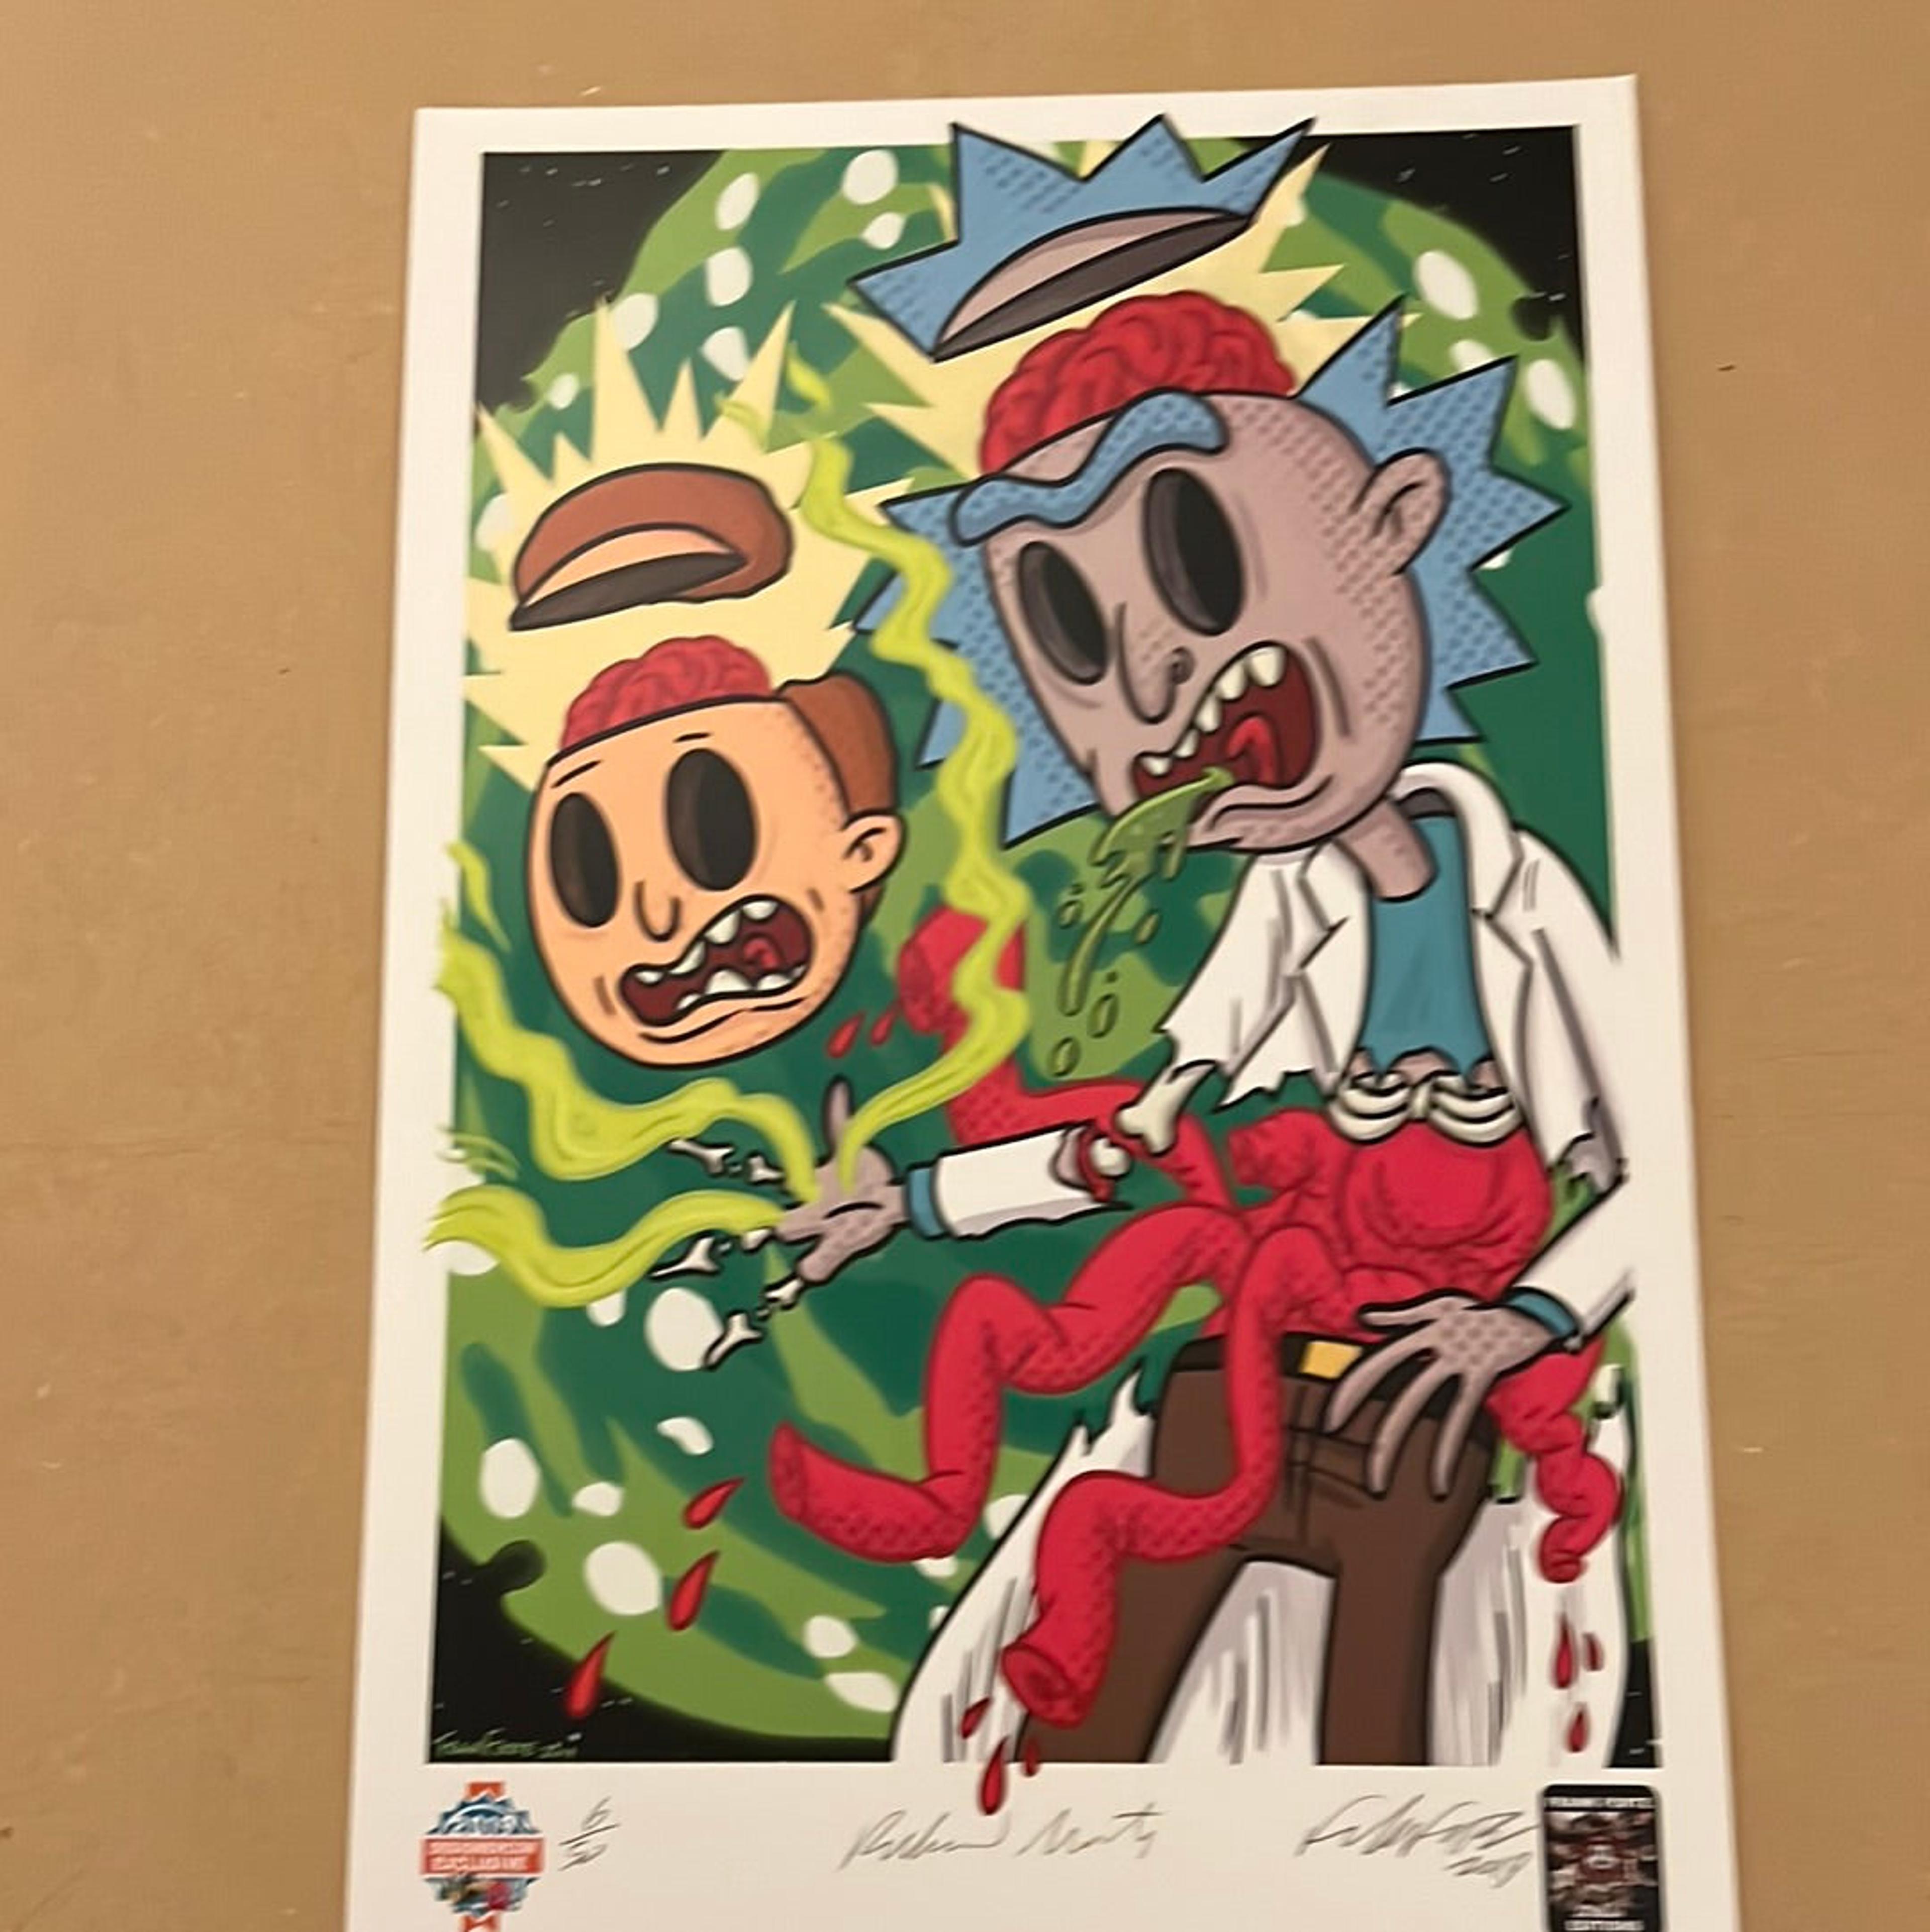 Rick and Morty DCON exclusive print limited to 50 by Frank Forte